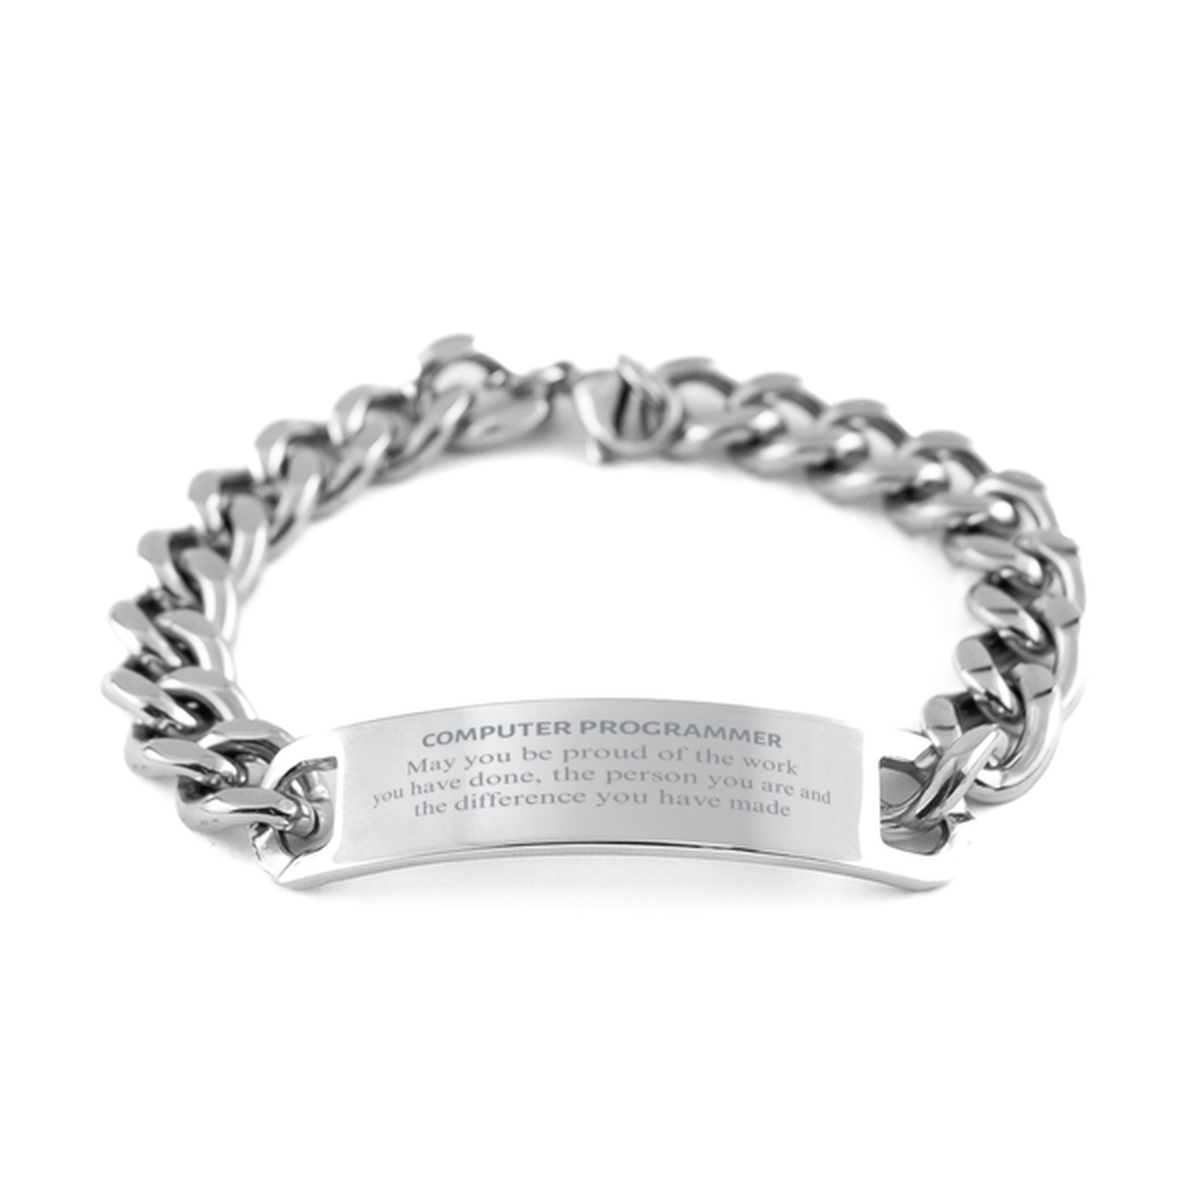 Computer Programmer May you be proud of the work you have done, Retirement Computer Programmer Cuban Chain Stainless Steel Bracelet for Colleague Appreciation Gifts Amazing for Computer Programmer